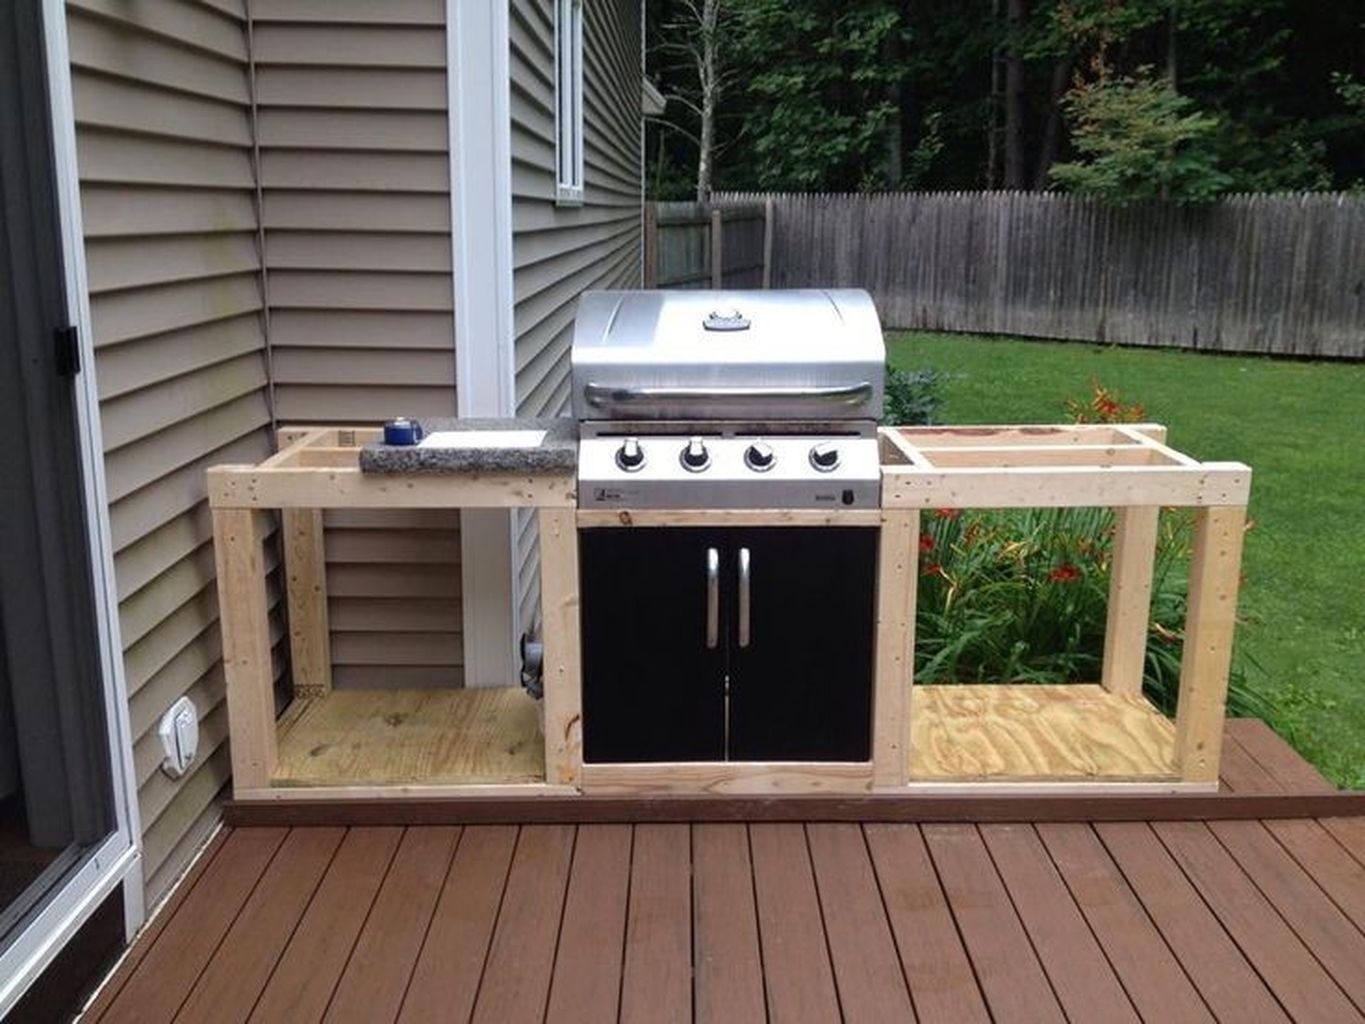 85 Best Outdoor Kitchen And Grill Ideas For Summer Backyard 